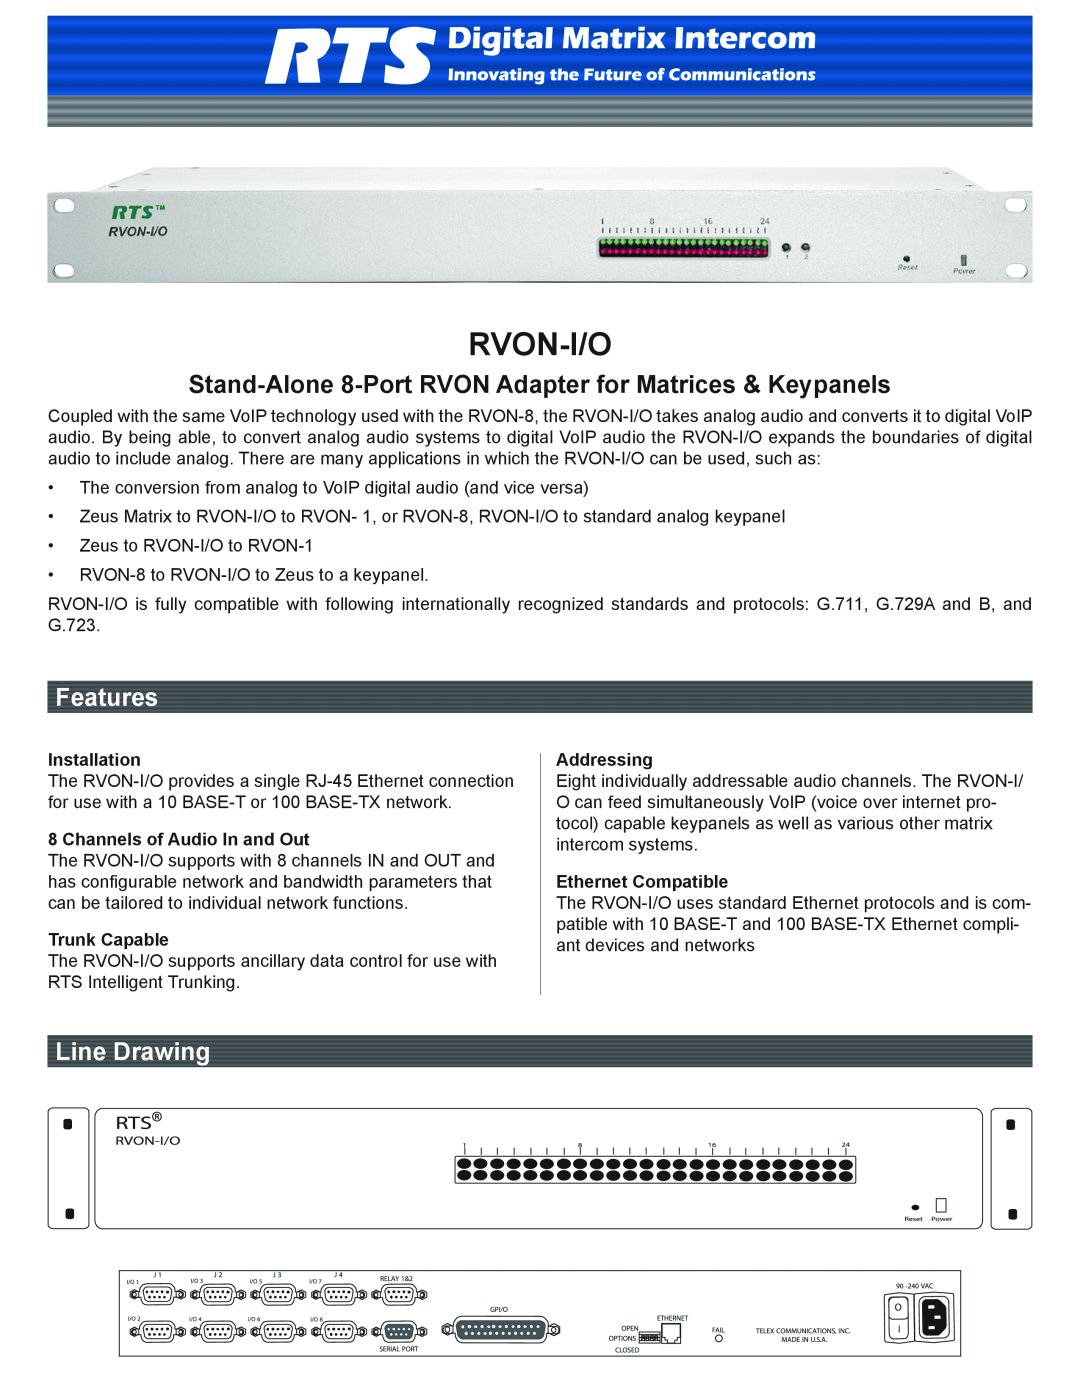 RTS RVON-I/O manual Rvon-I/O, Installation, Channels of Audio In and Out, Trunk Capable, Addressing, Ethernet Compatible 